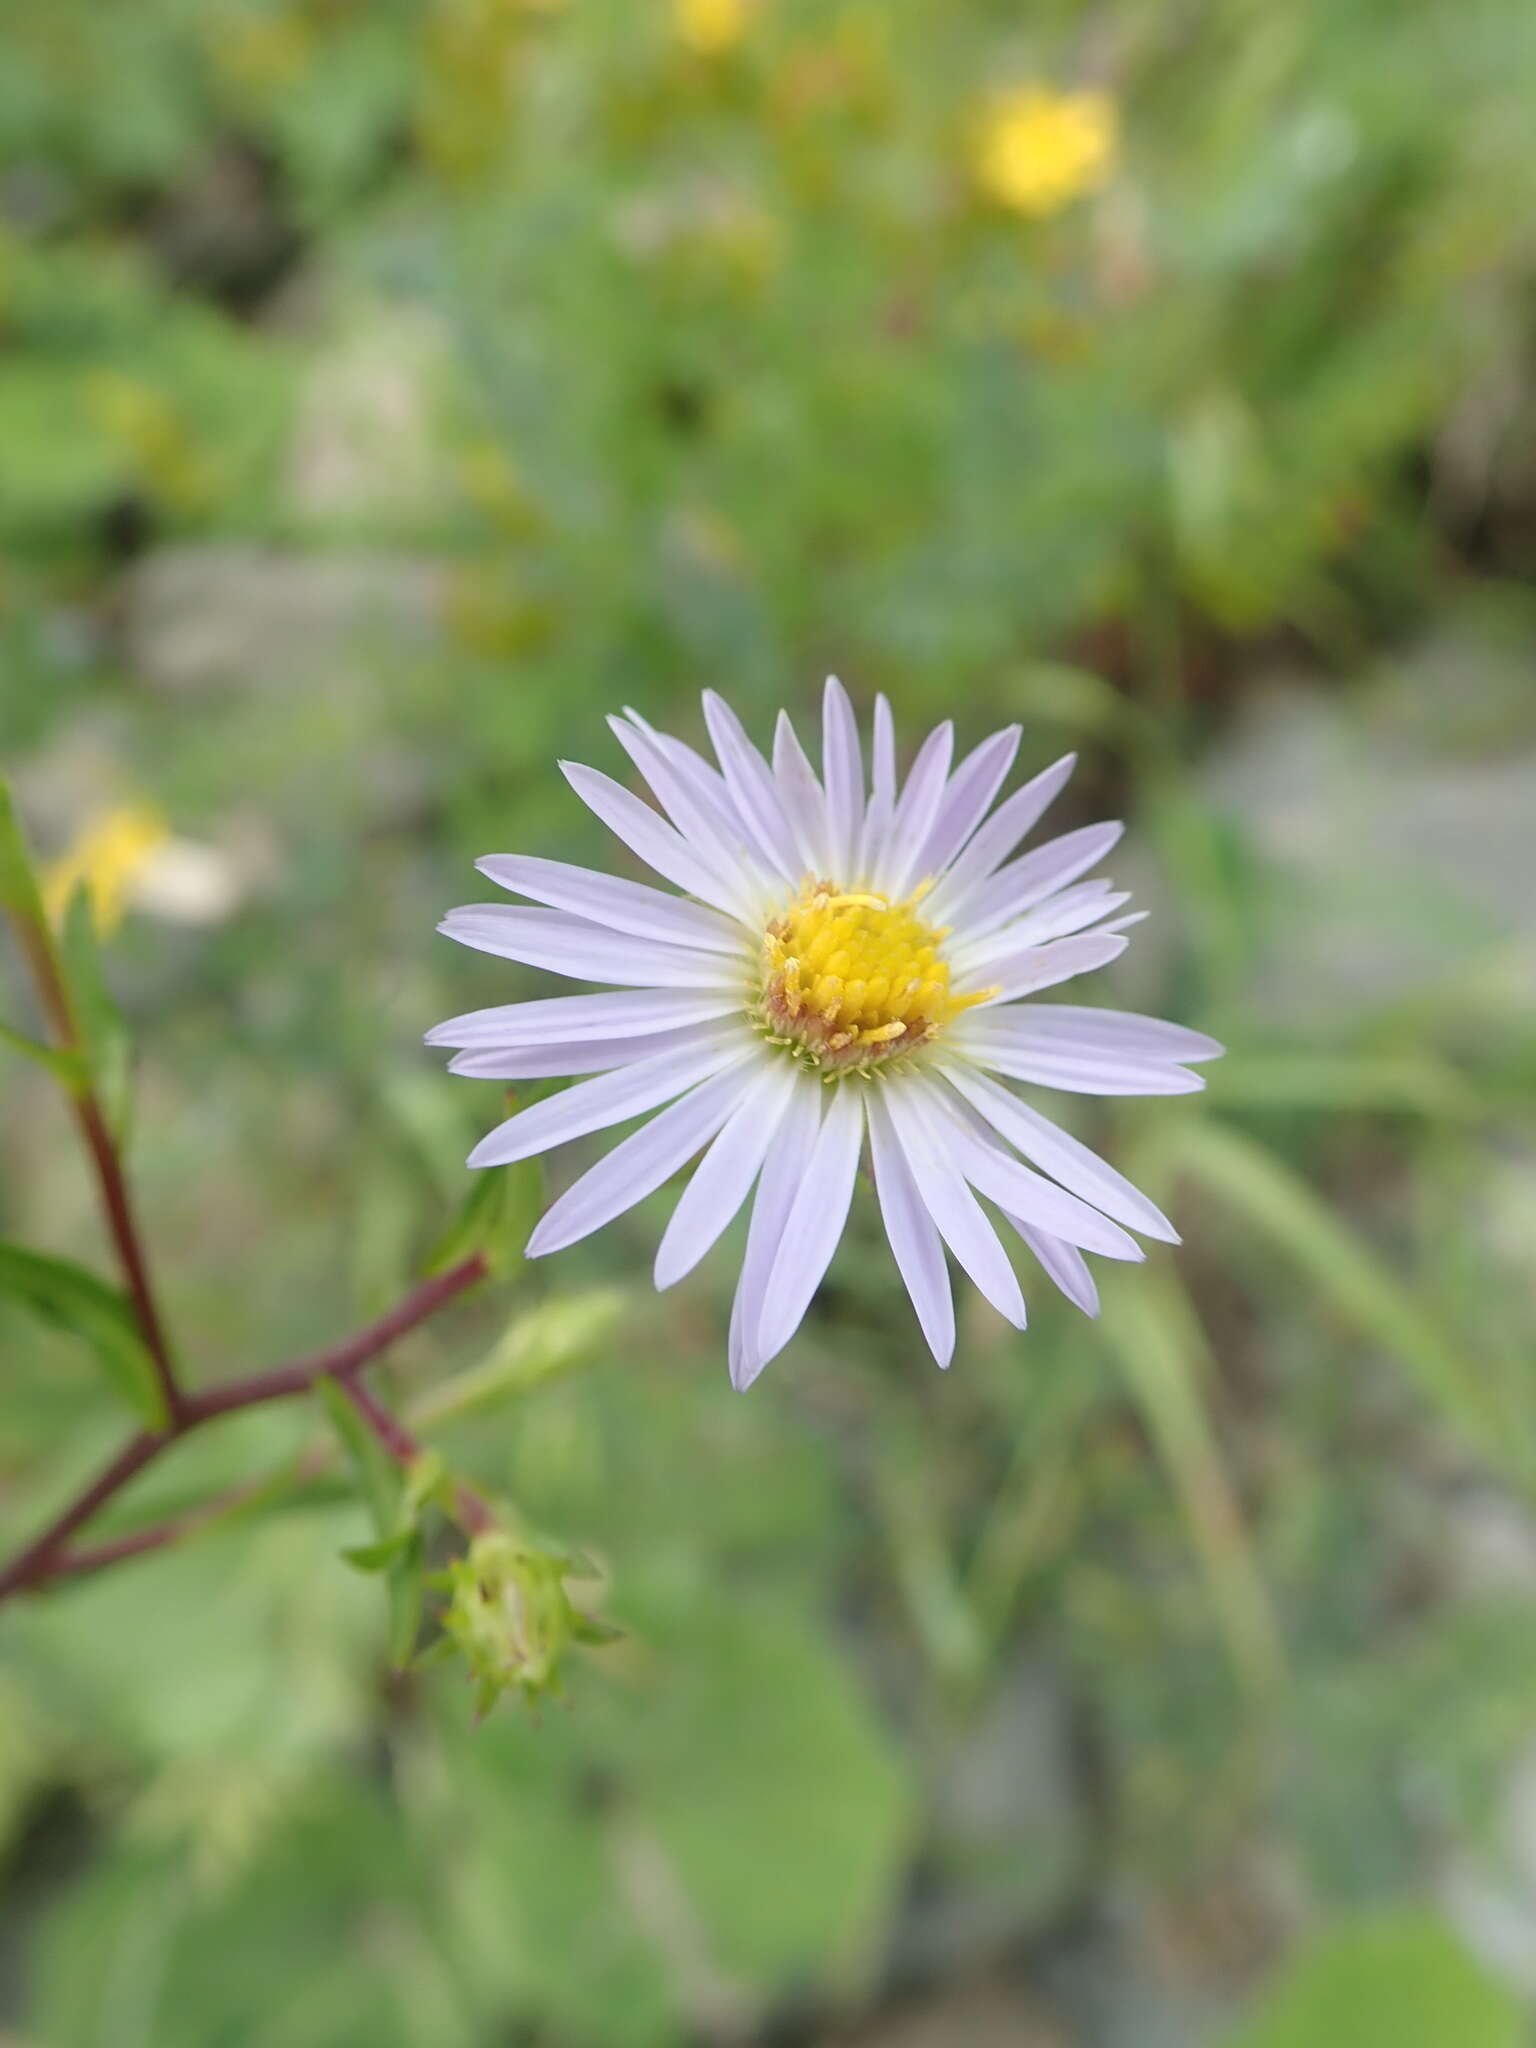 Image of hairy New York aster